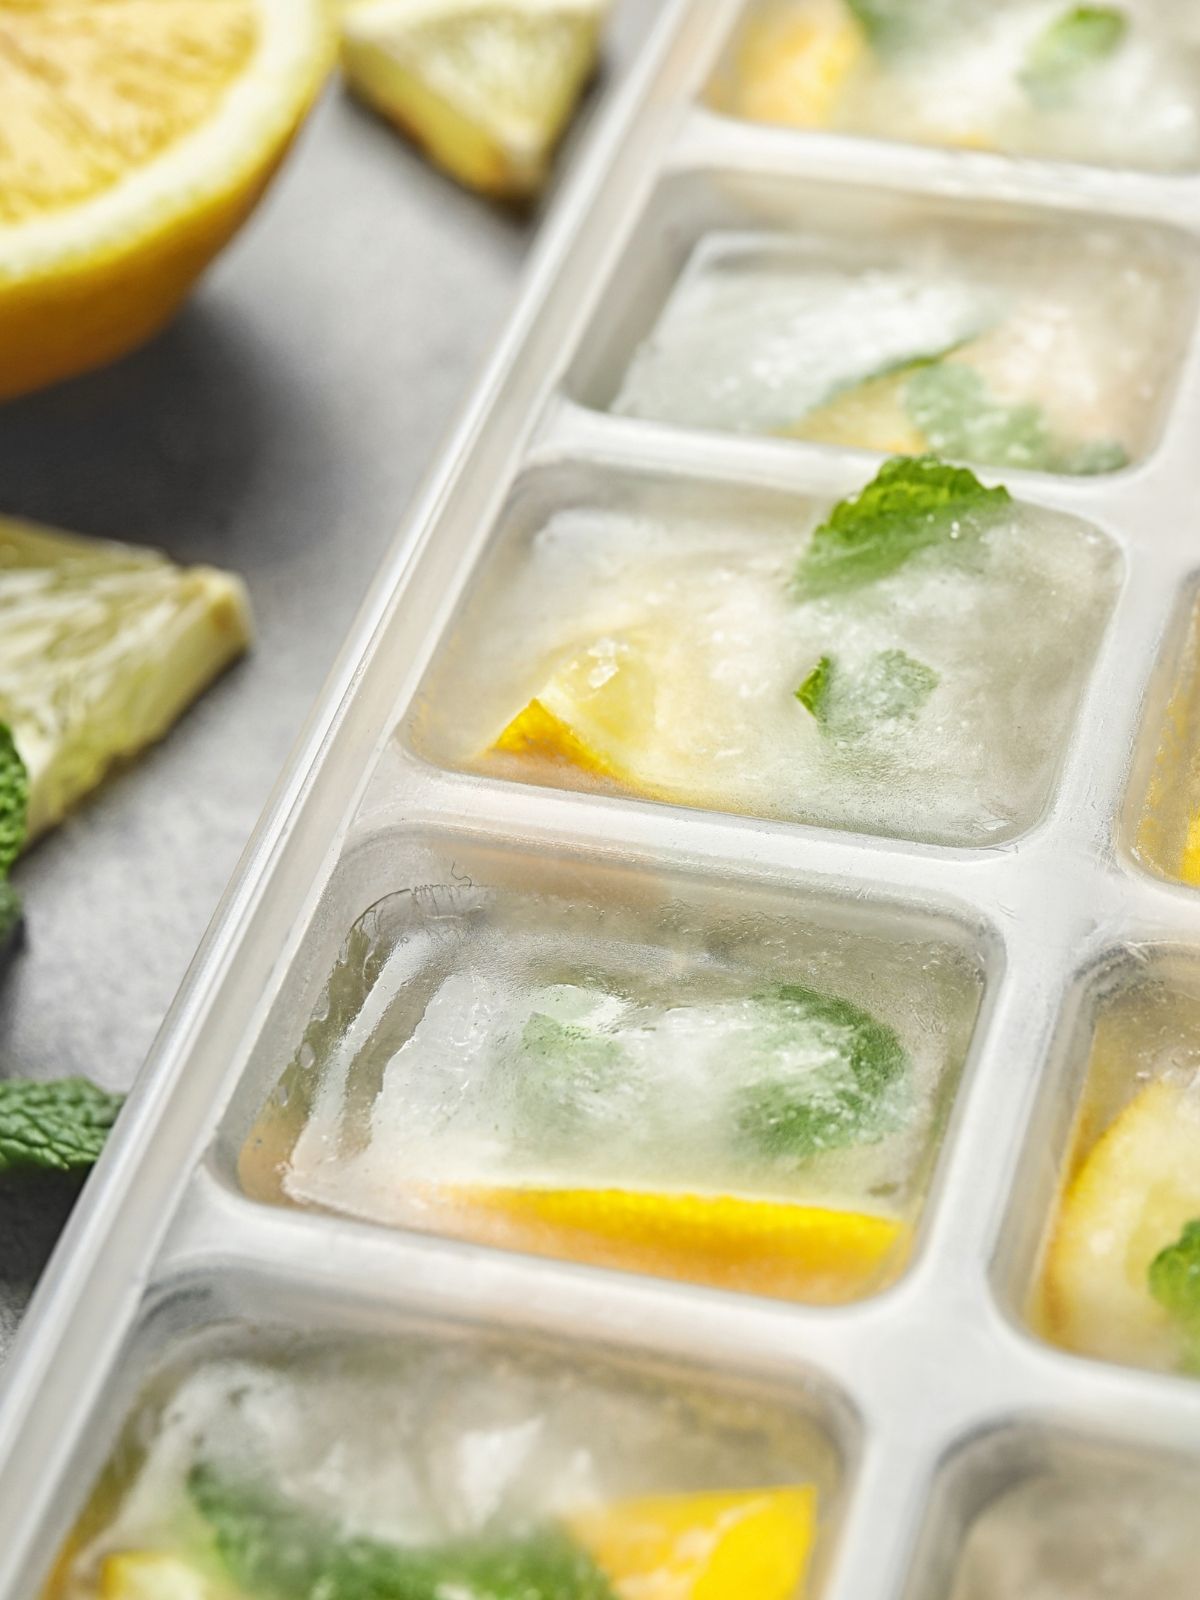 lemon and lime slices in ice cube tray.